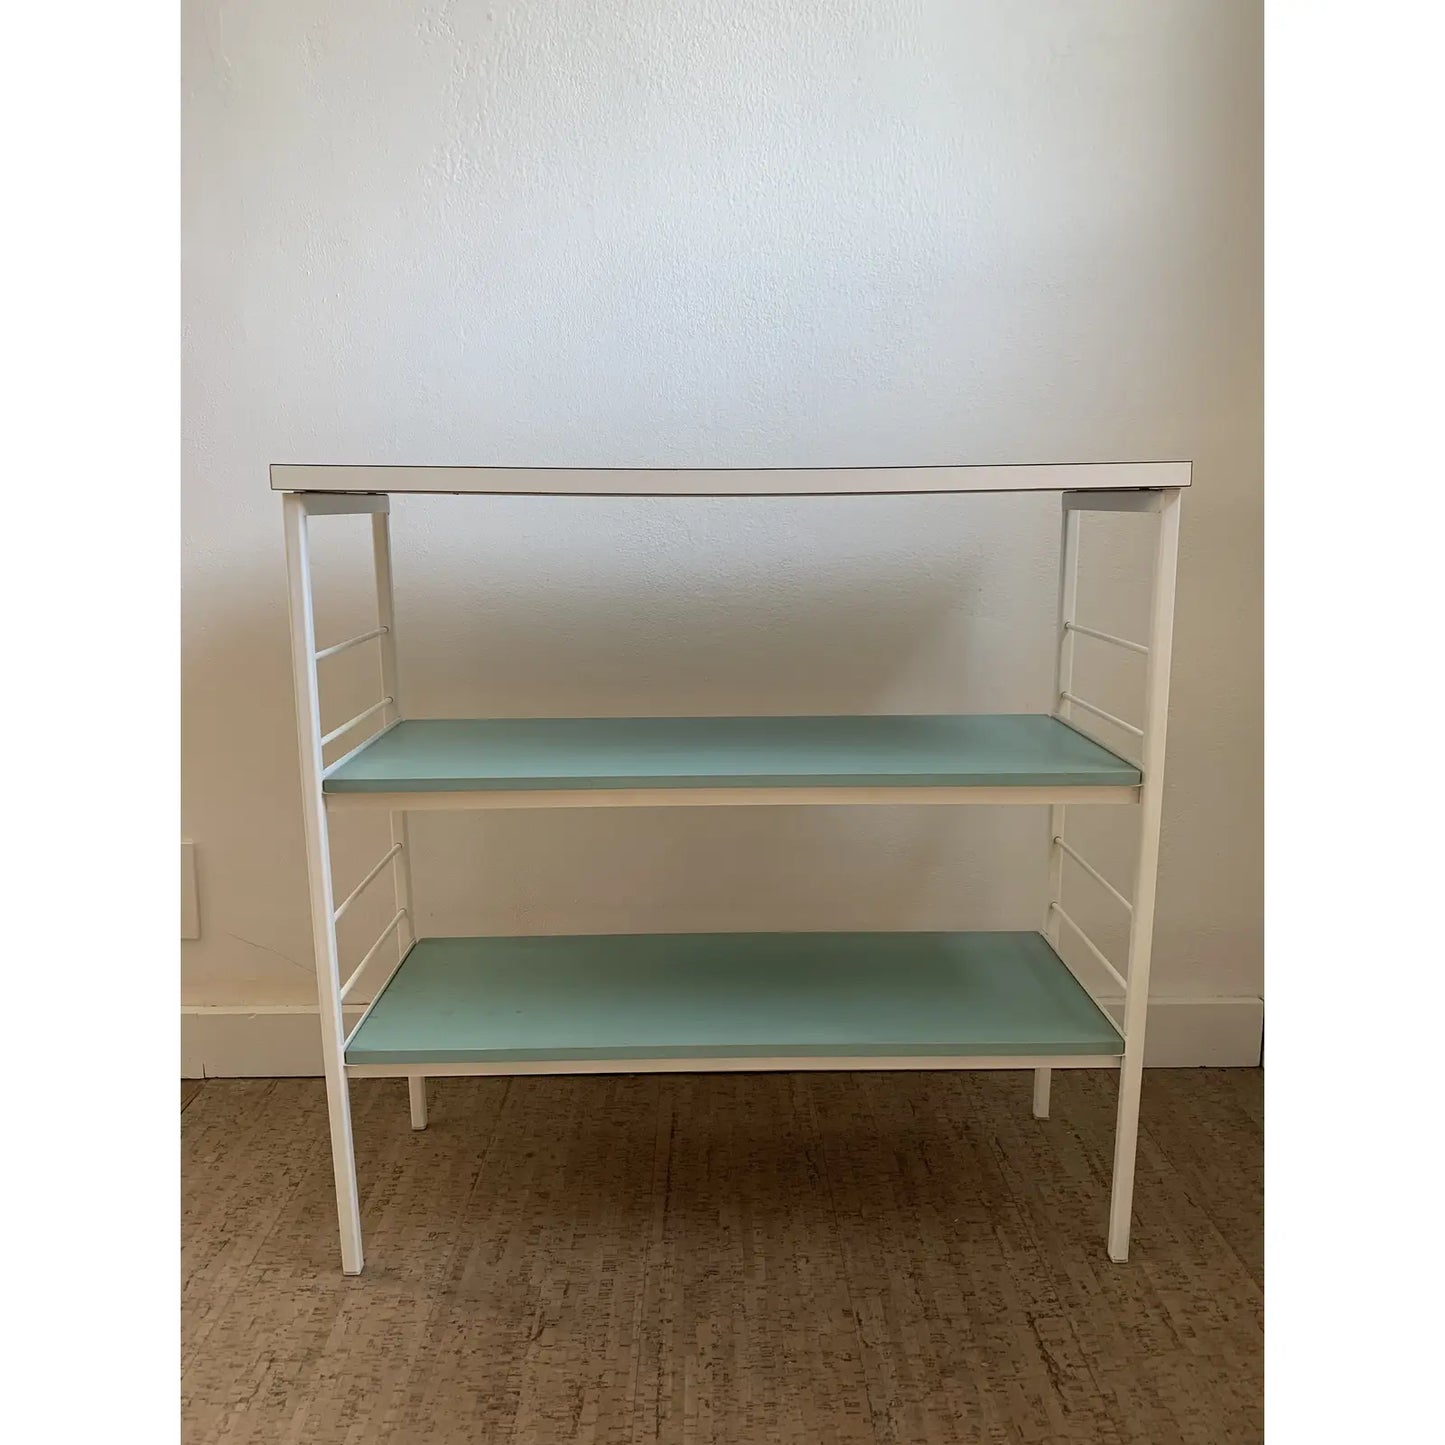 Mid 20th Century Mid-Century Modern Vista of California Shelves in Original White Formica Top and Teal Shelves